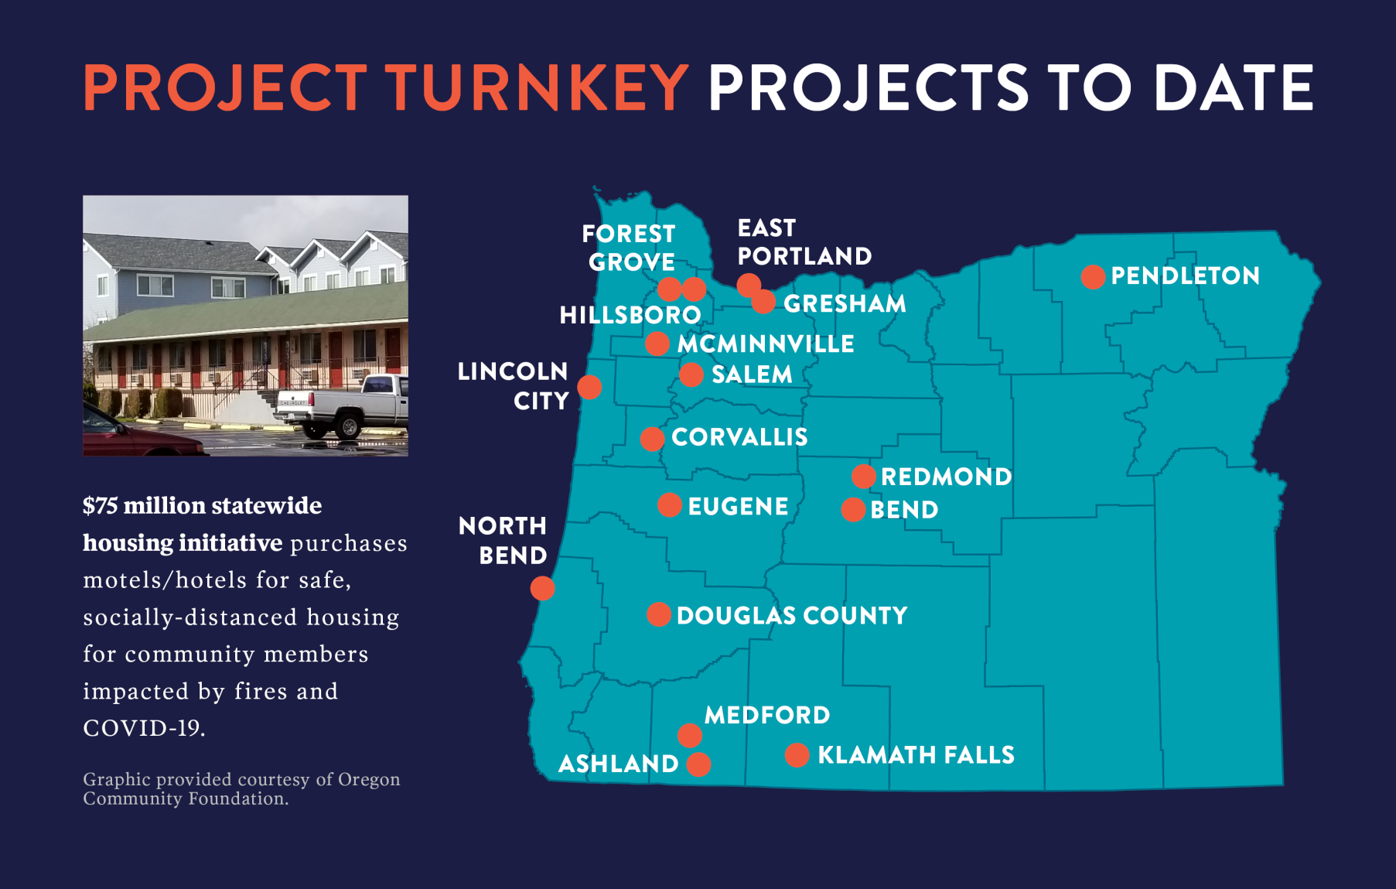 'Project Turnkey' has added almost 900 units of emergency housing in Oregon, officials say